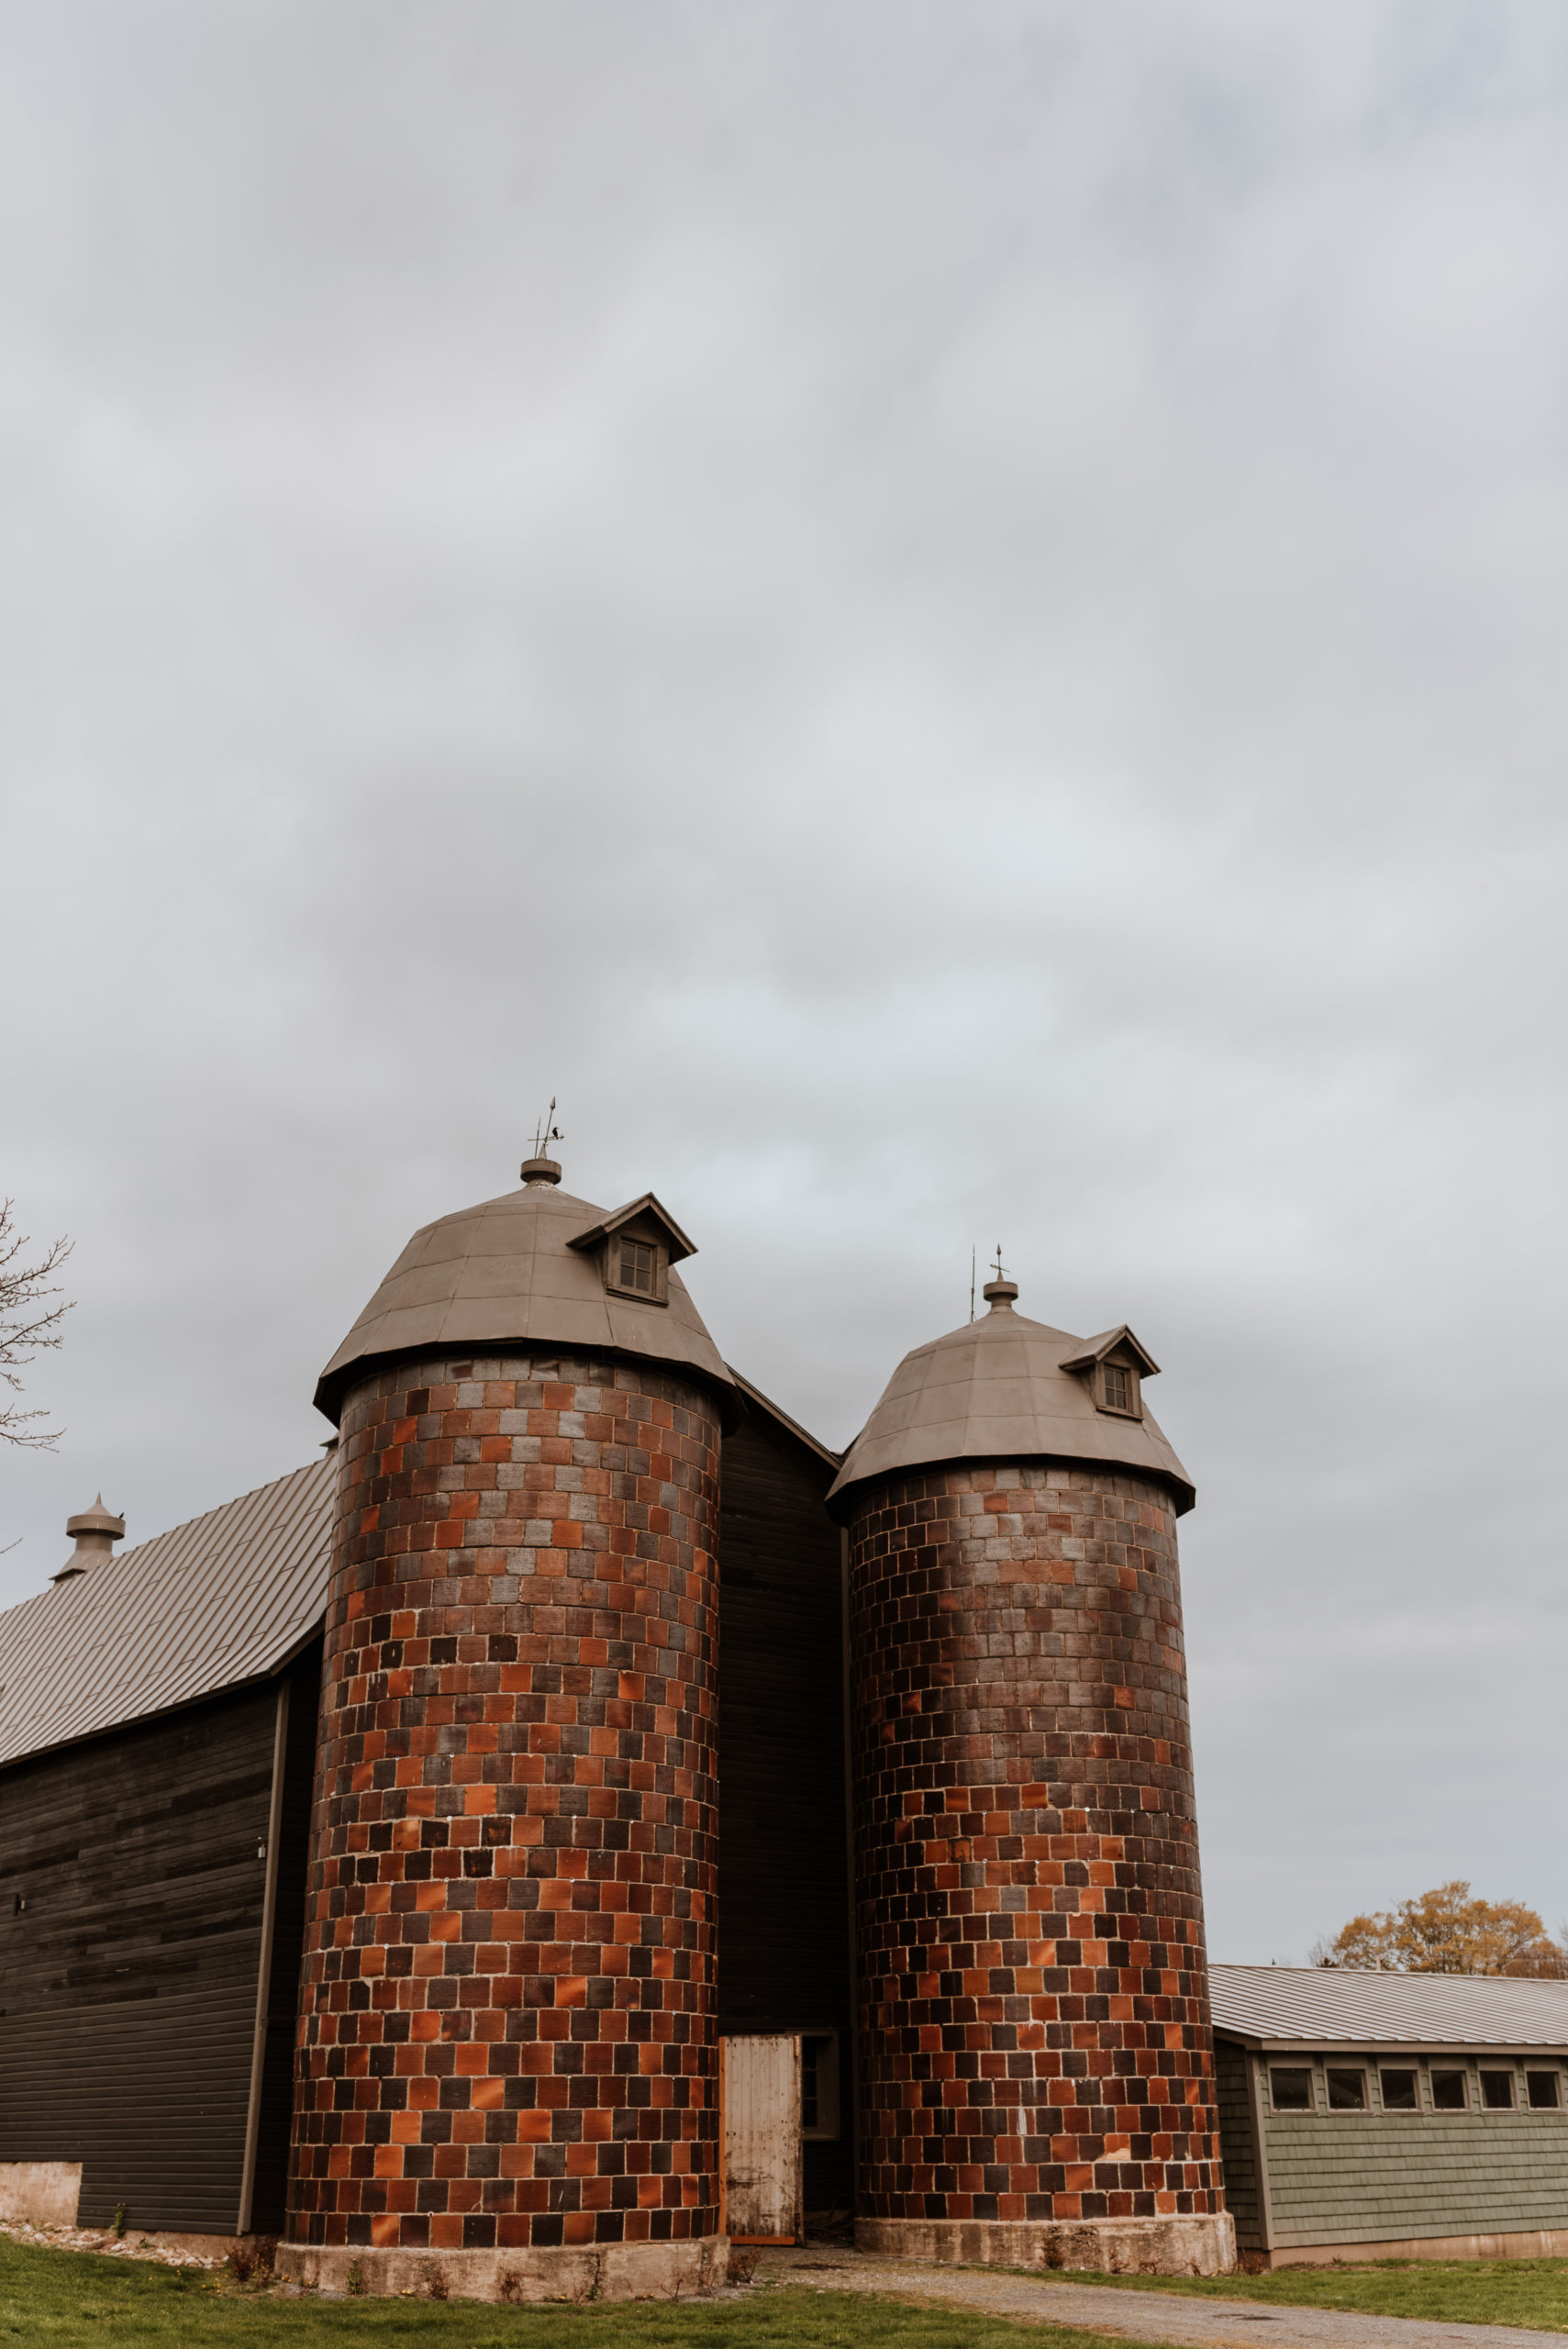 Two terracotta silos found at Curtis Manor venue in Oswego NY